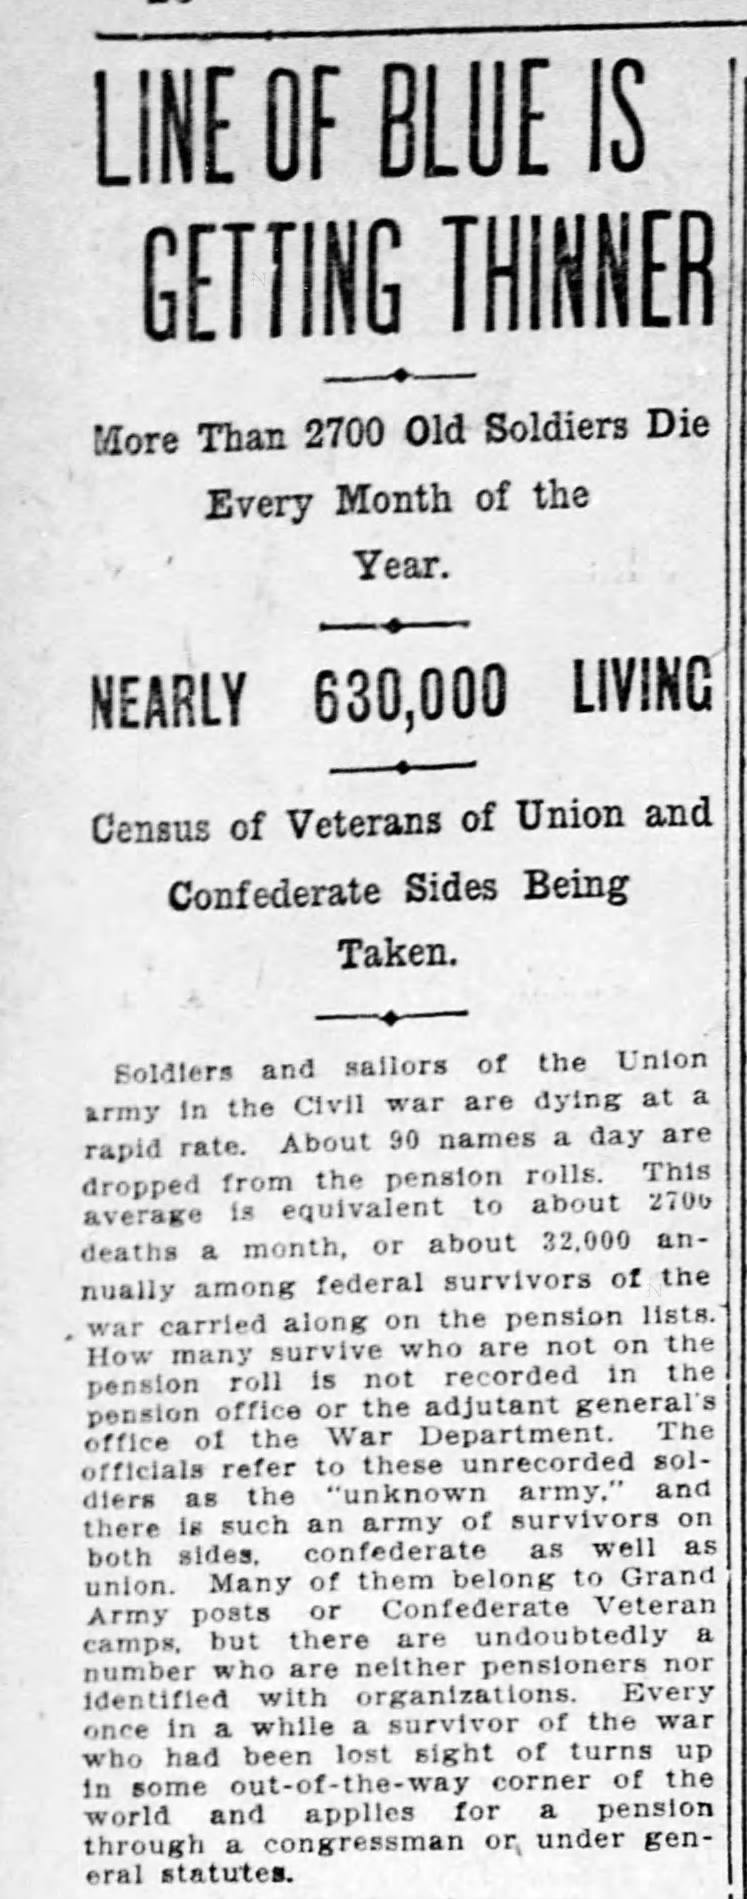 1910 Census to ask if Union or Confederate Veteran